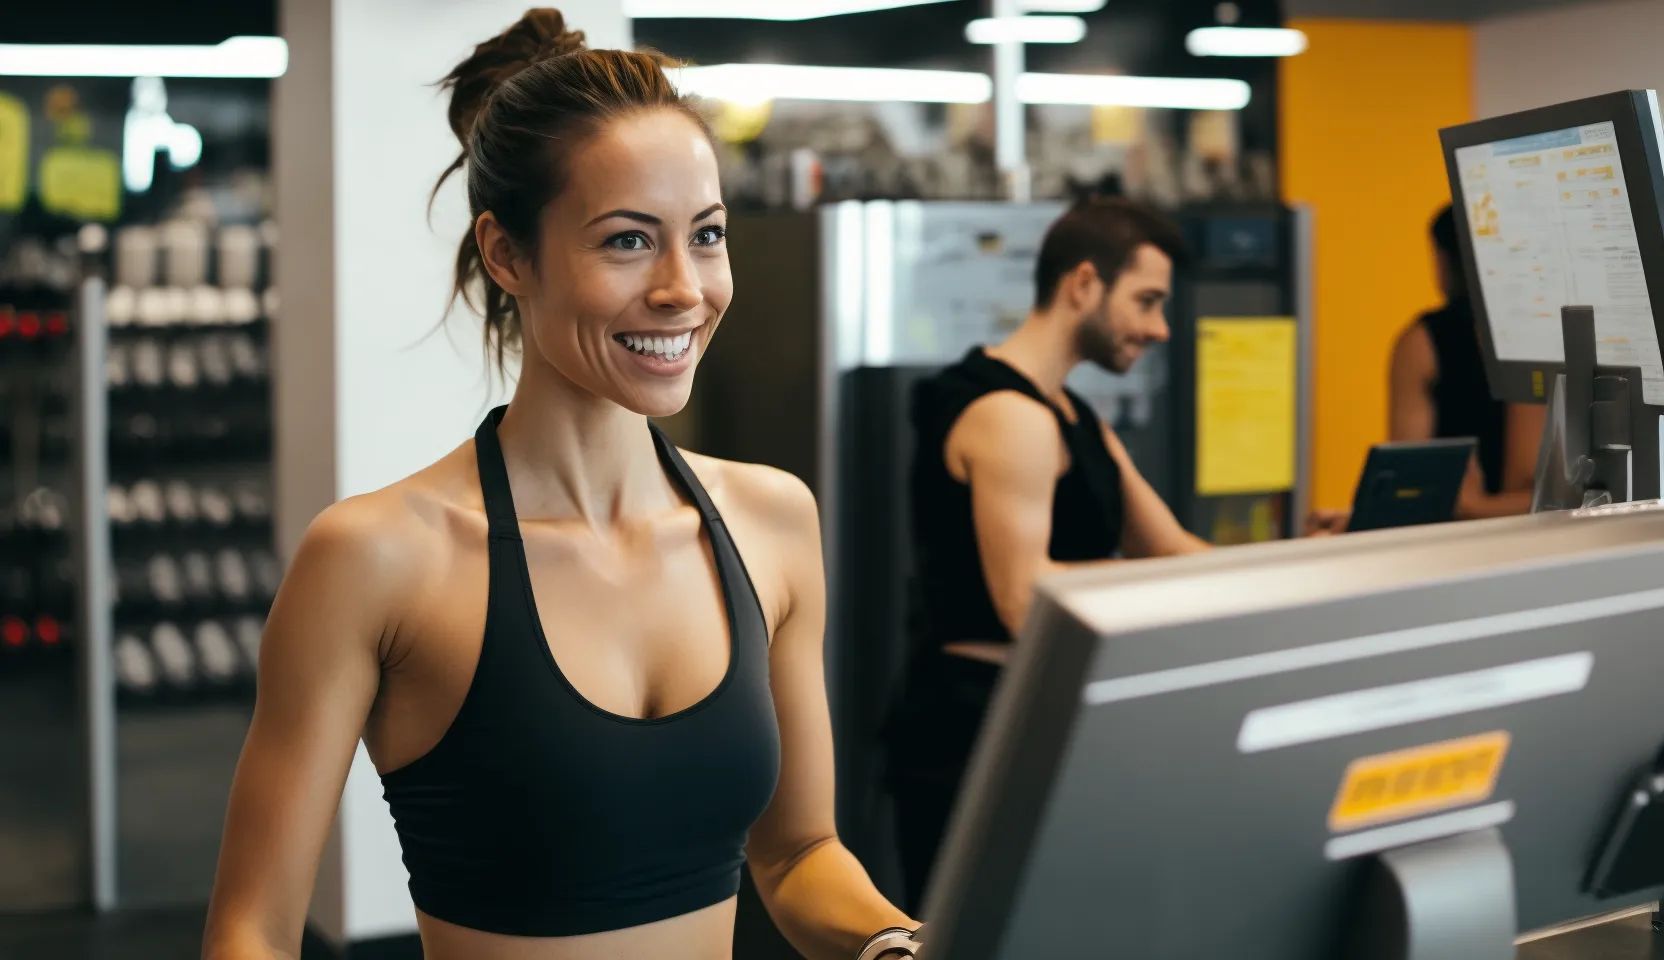 Solutions for gyms and fitness clubs